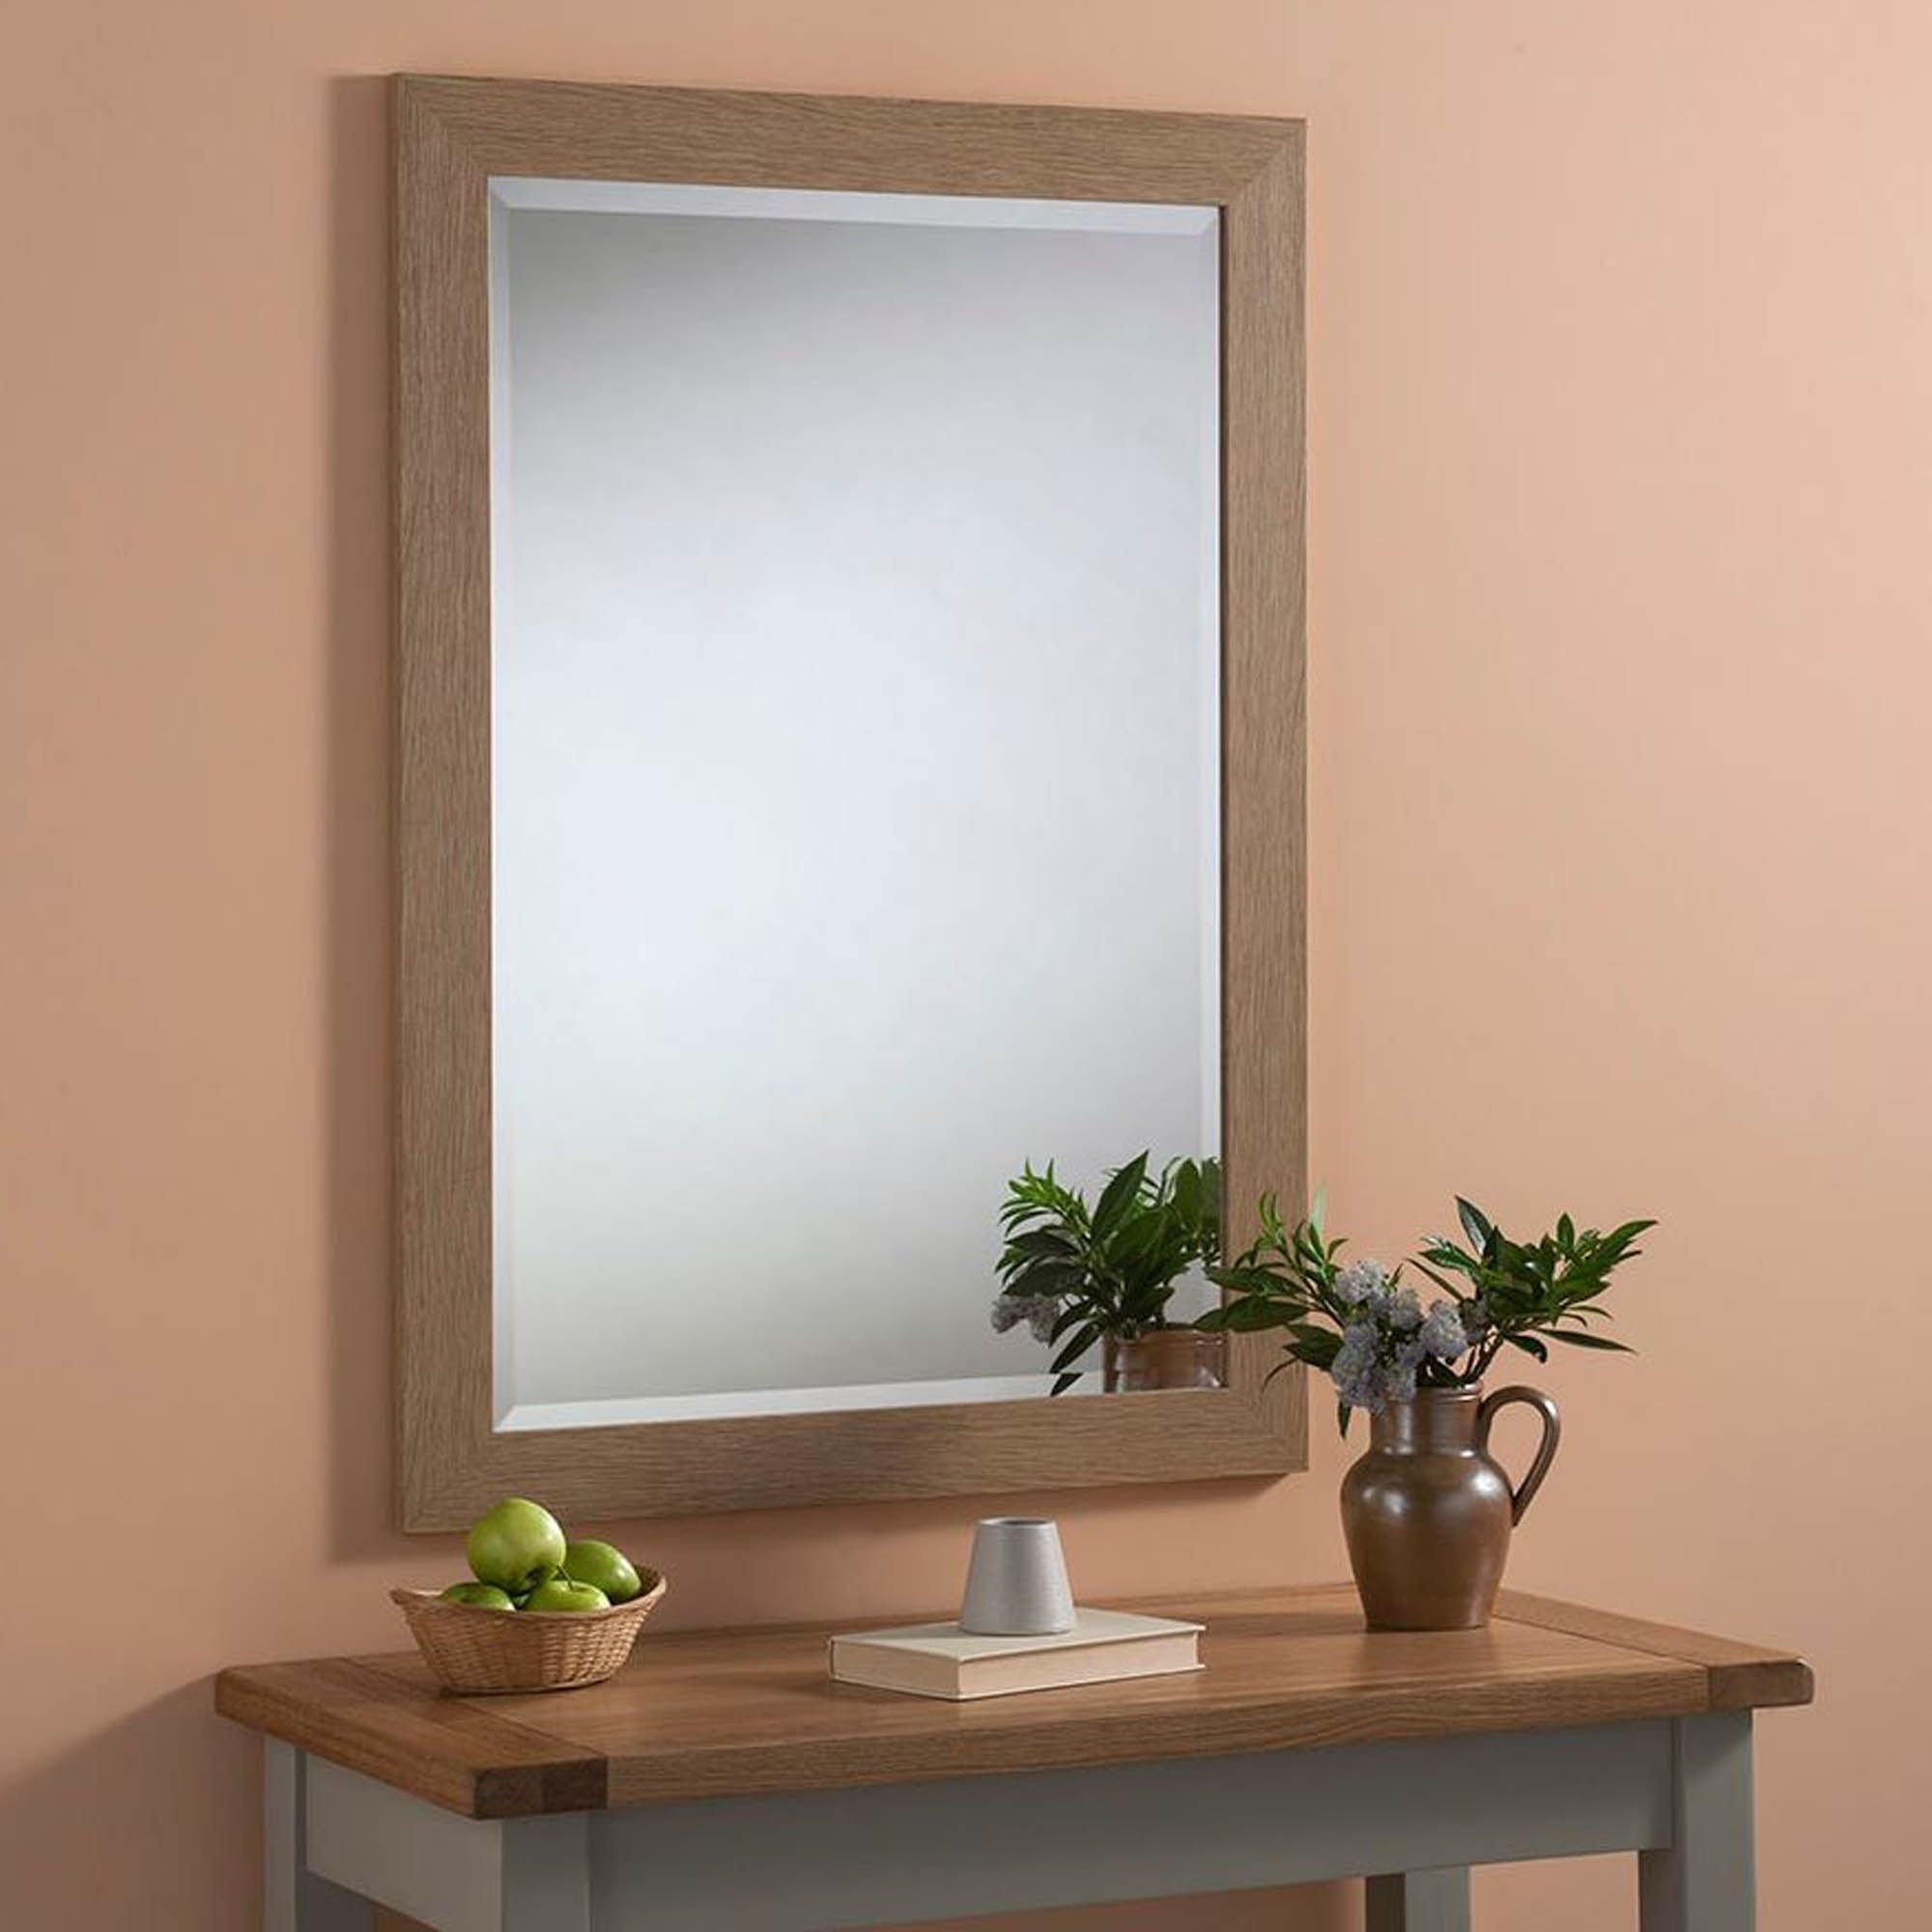 Decorative Natural Oak Wall Mirror | Decor | Homesdirect365 Intended For Natural Oak Veneer Wall Mirrors (View 6 of 15)